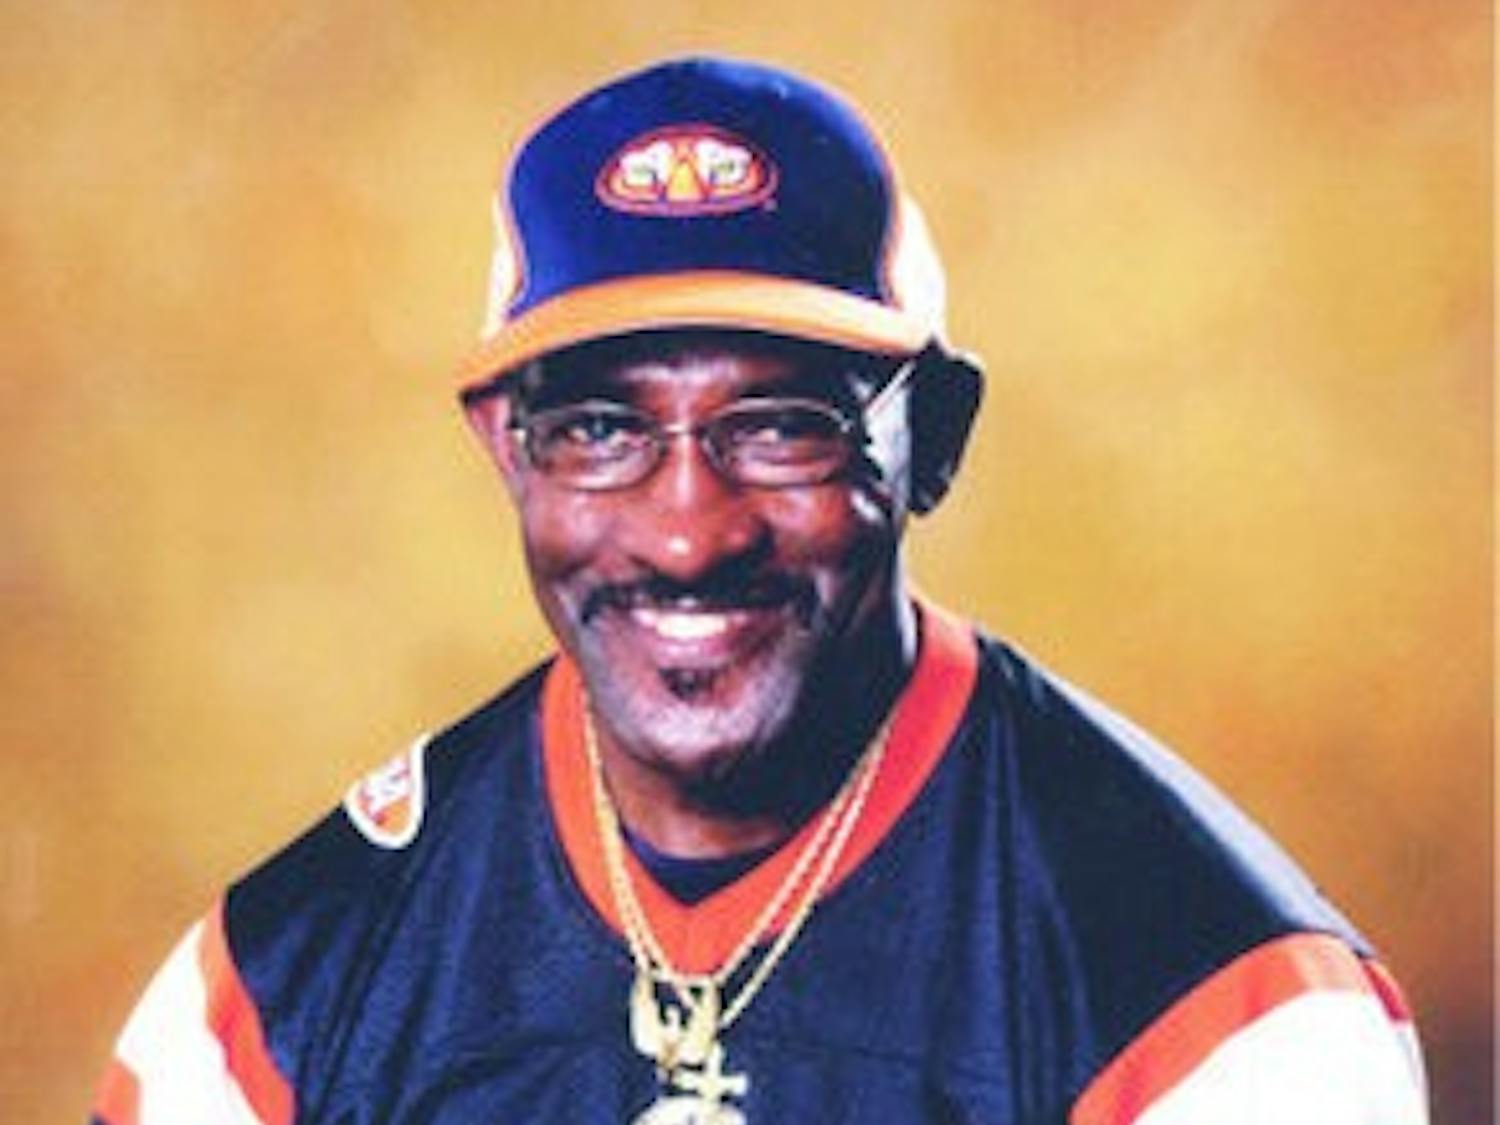 Lifelong Auburn resident Johnny Richmond, also known as Mr. Penny, does 25 push-ups every time Auburn scores. (Contributed)